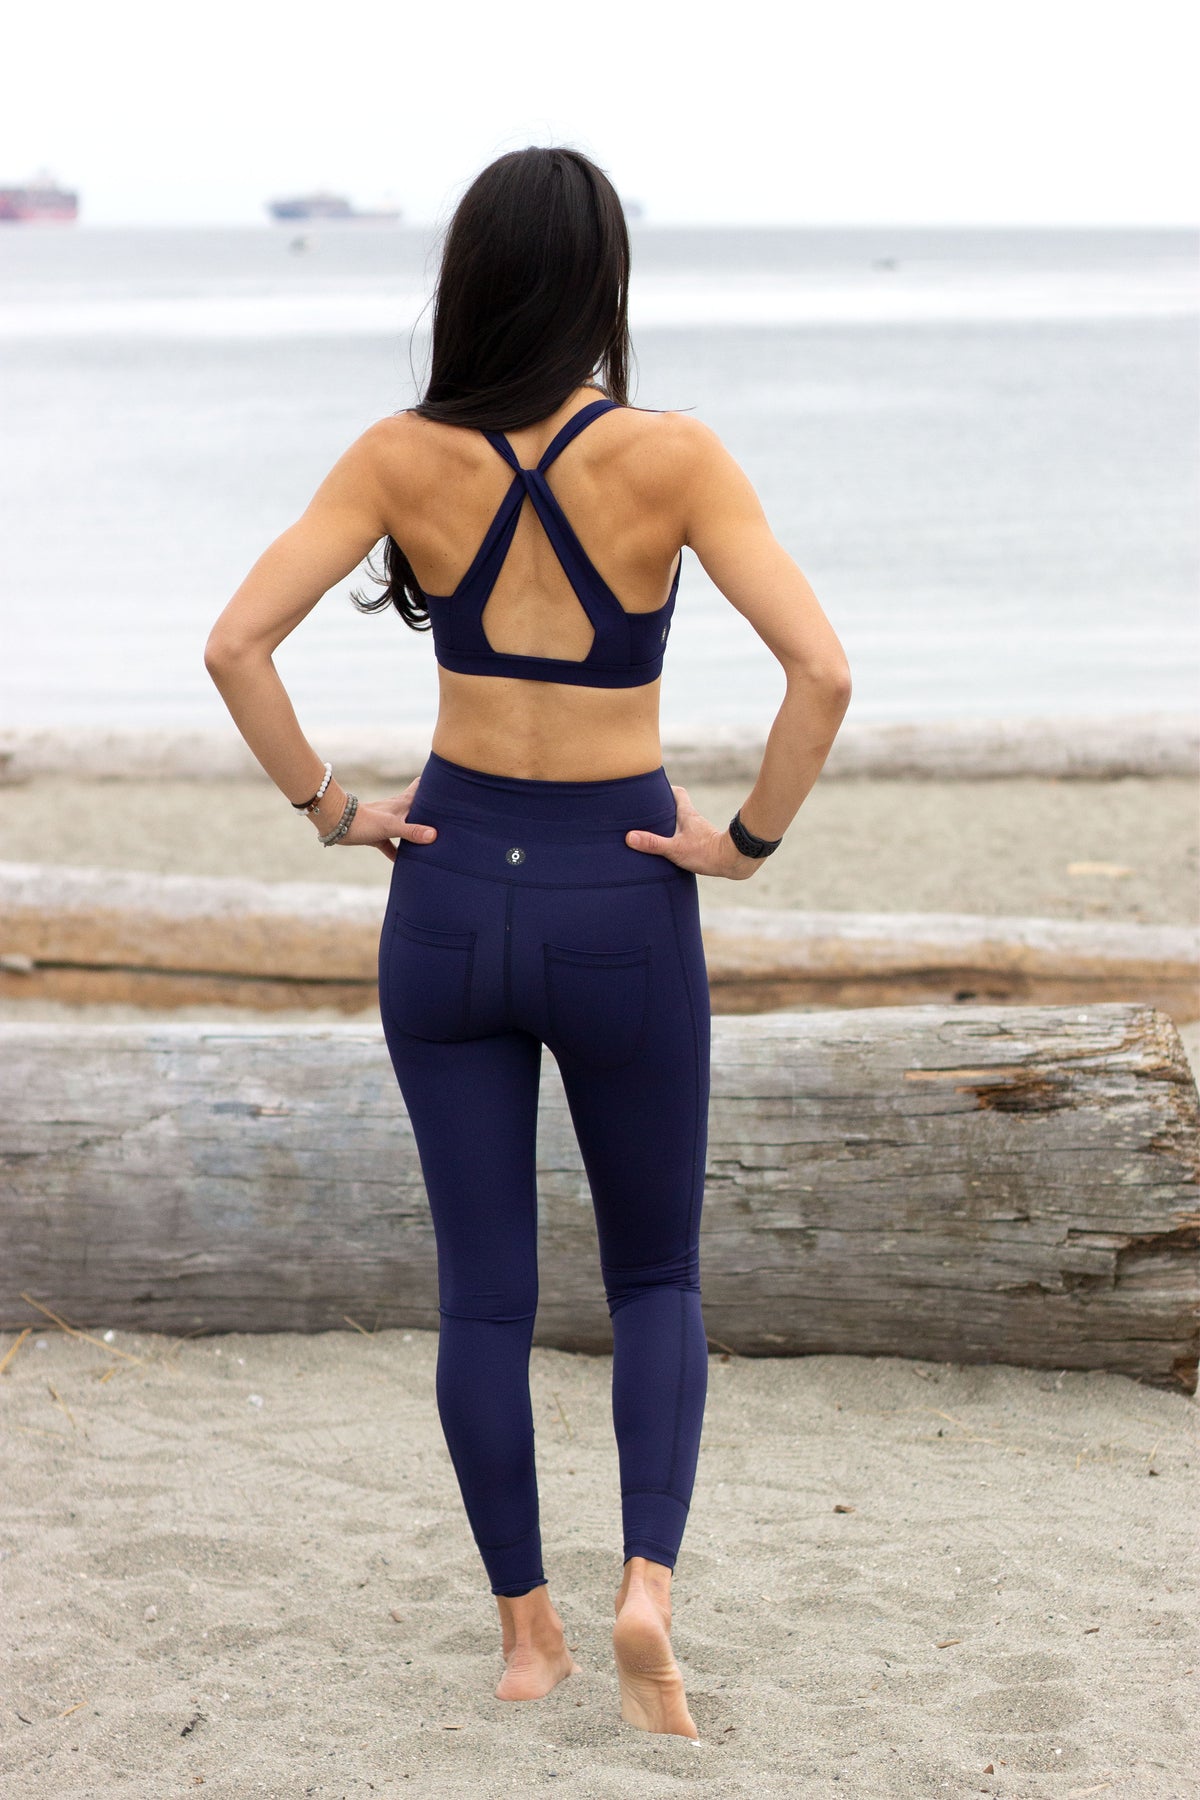 Running Bare No Bounce Thermal Sports Bra- Teal. Workout Tops